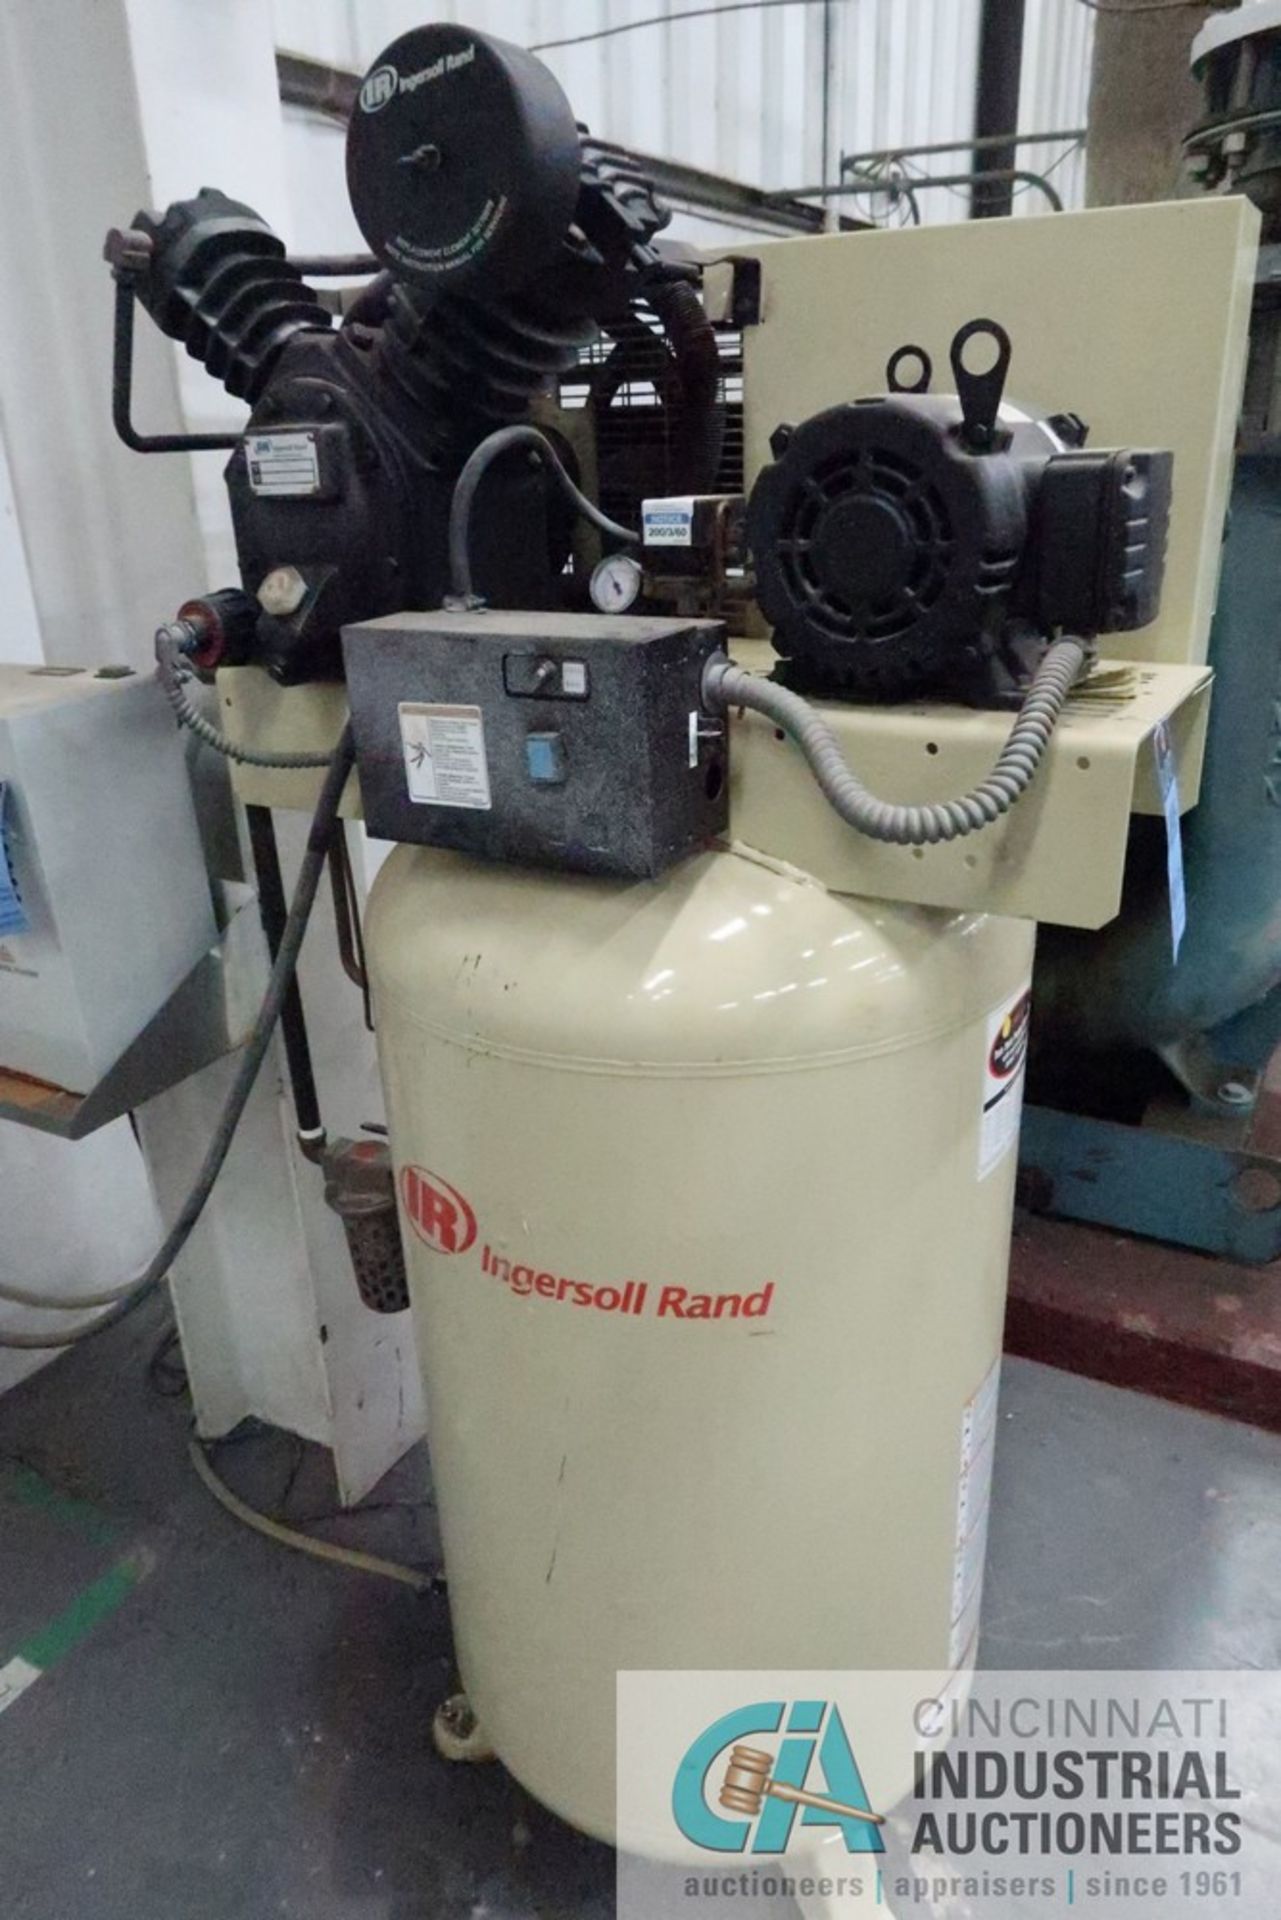 5-HP INGERSOLL RAND 2475 VERTICAL TANK AIR COMPRESSOR W/ DOMINICK AIR DRYER - Image 3 of 8